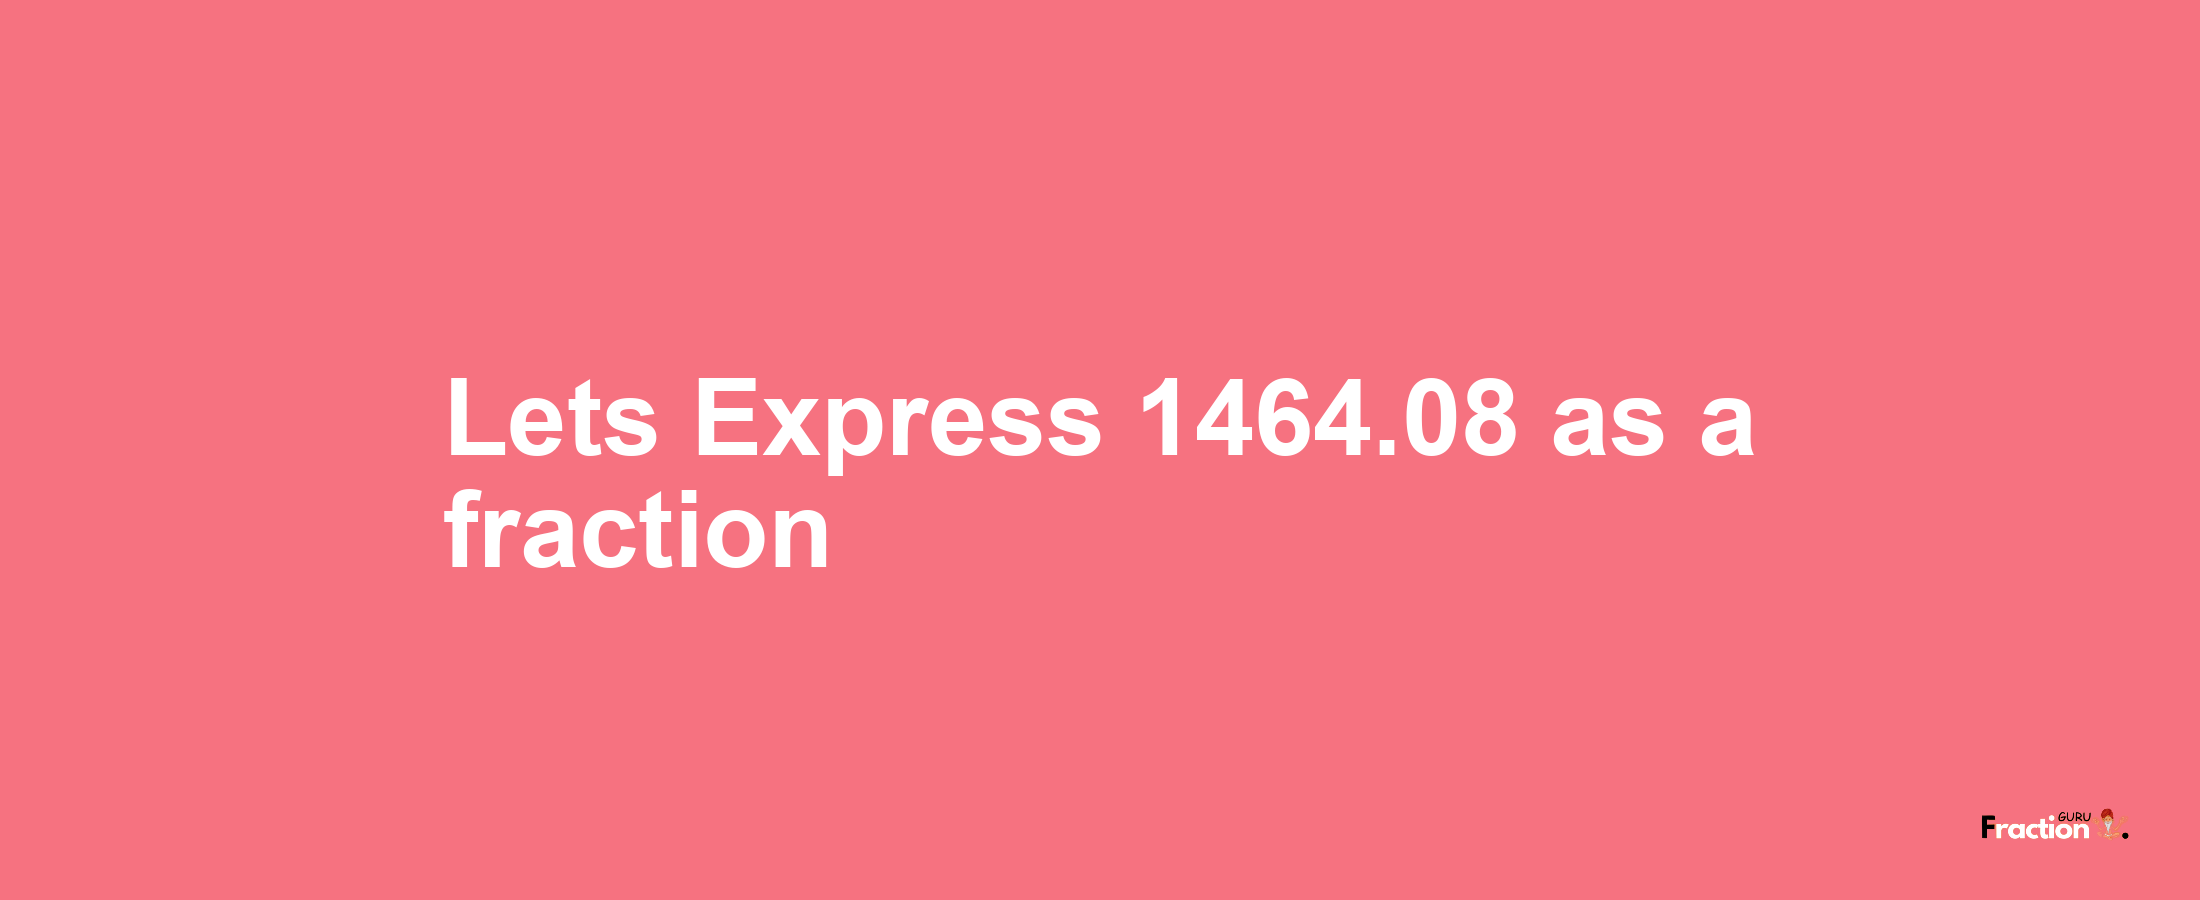 Lets Express 1464.08 as afraction